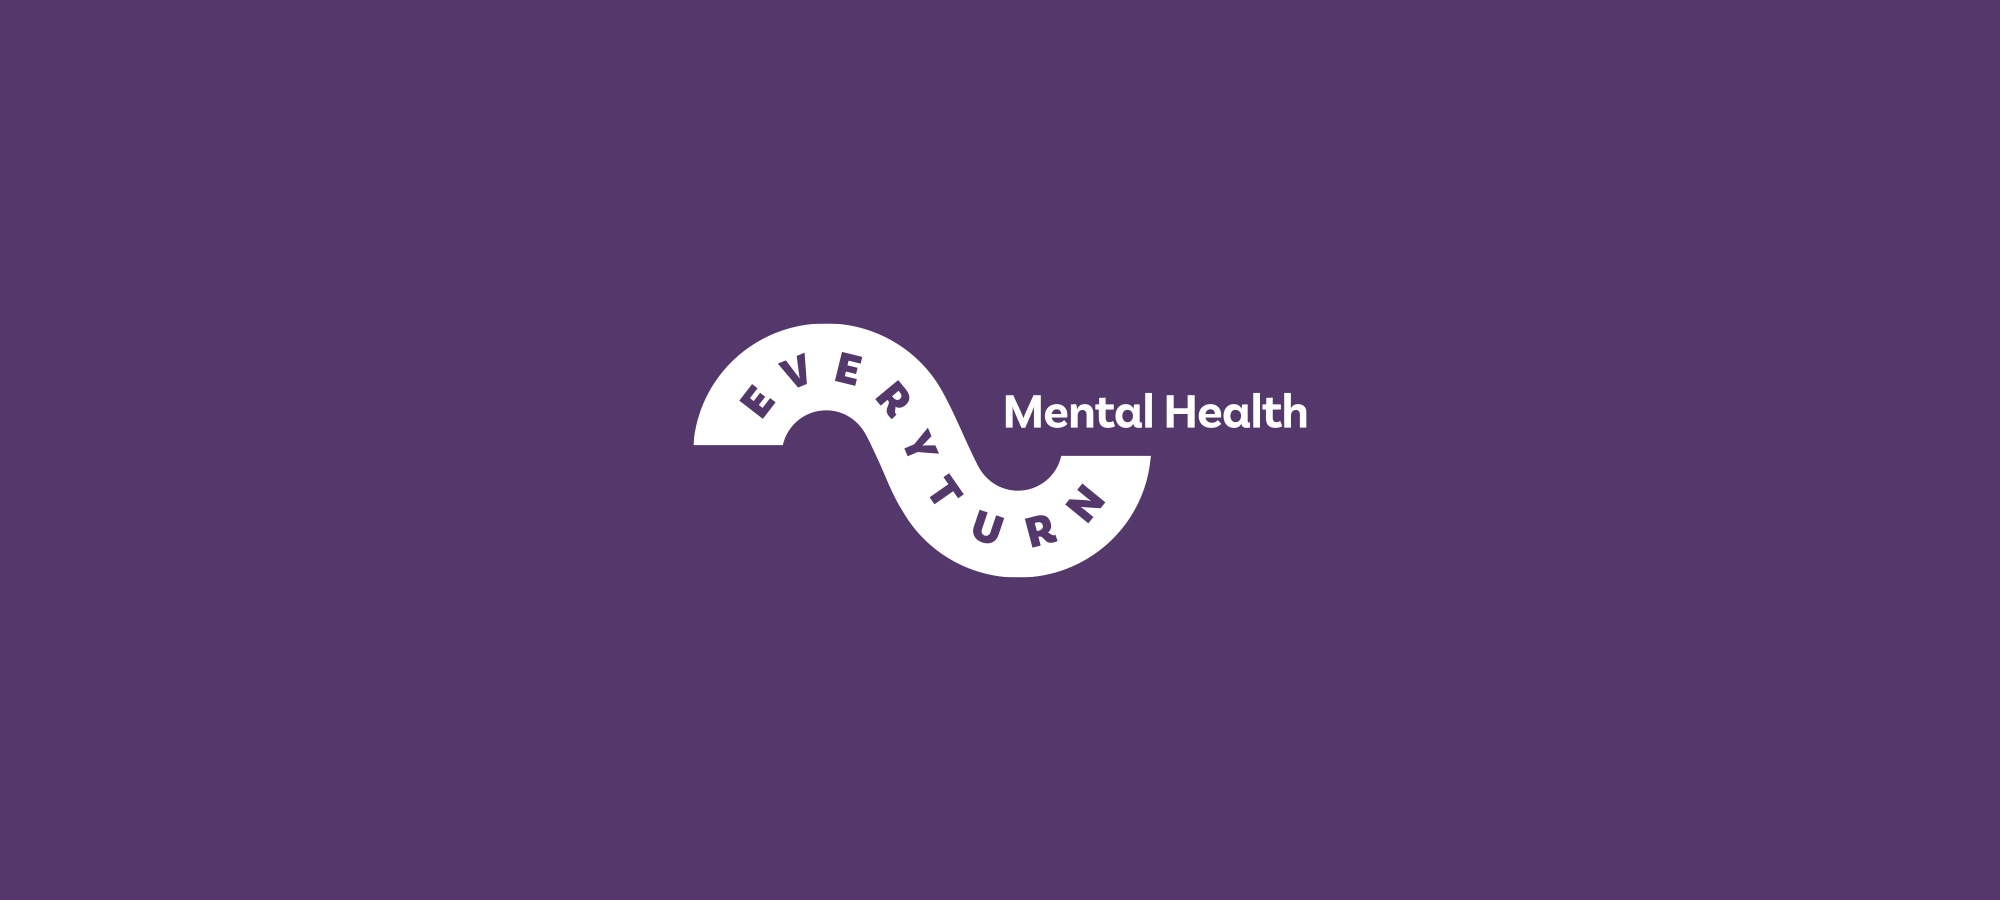 Welcome to Everyturn Mental Health!